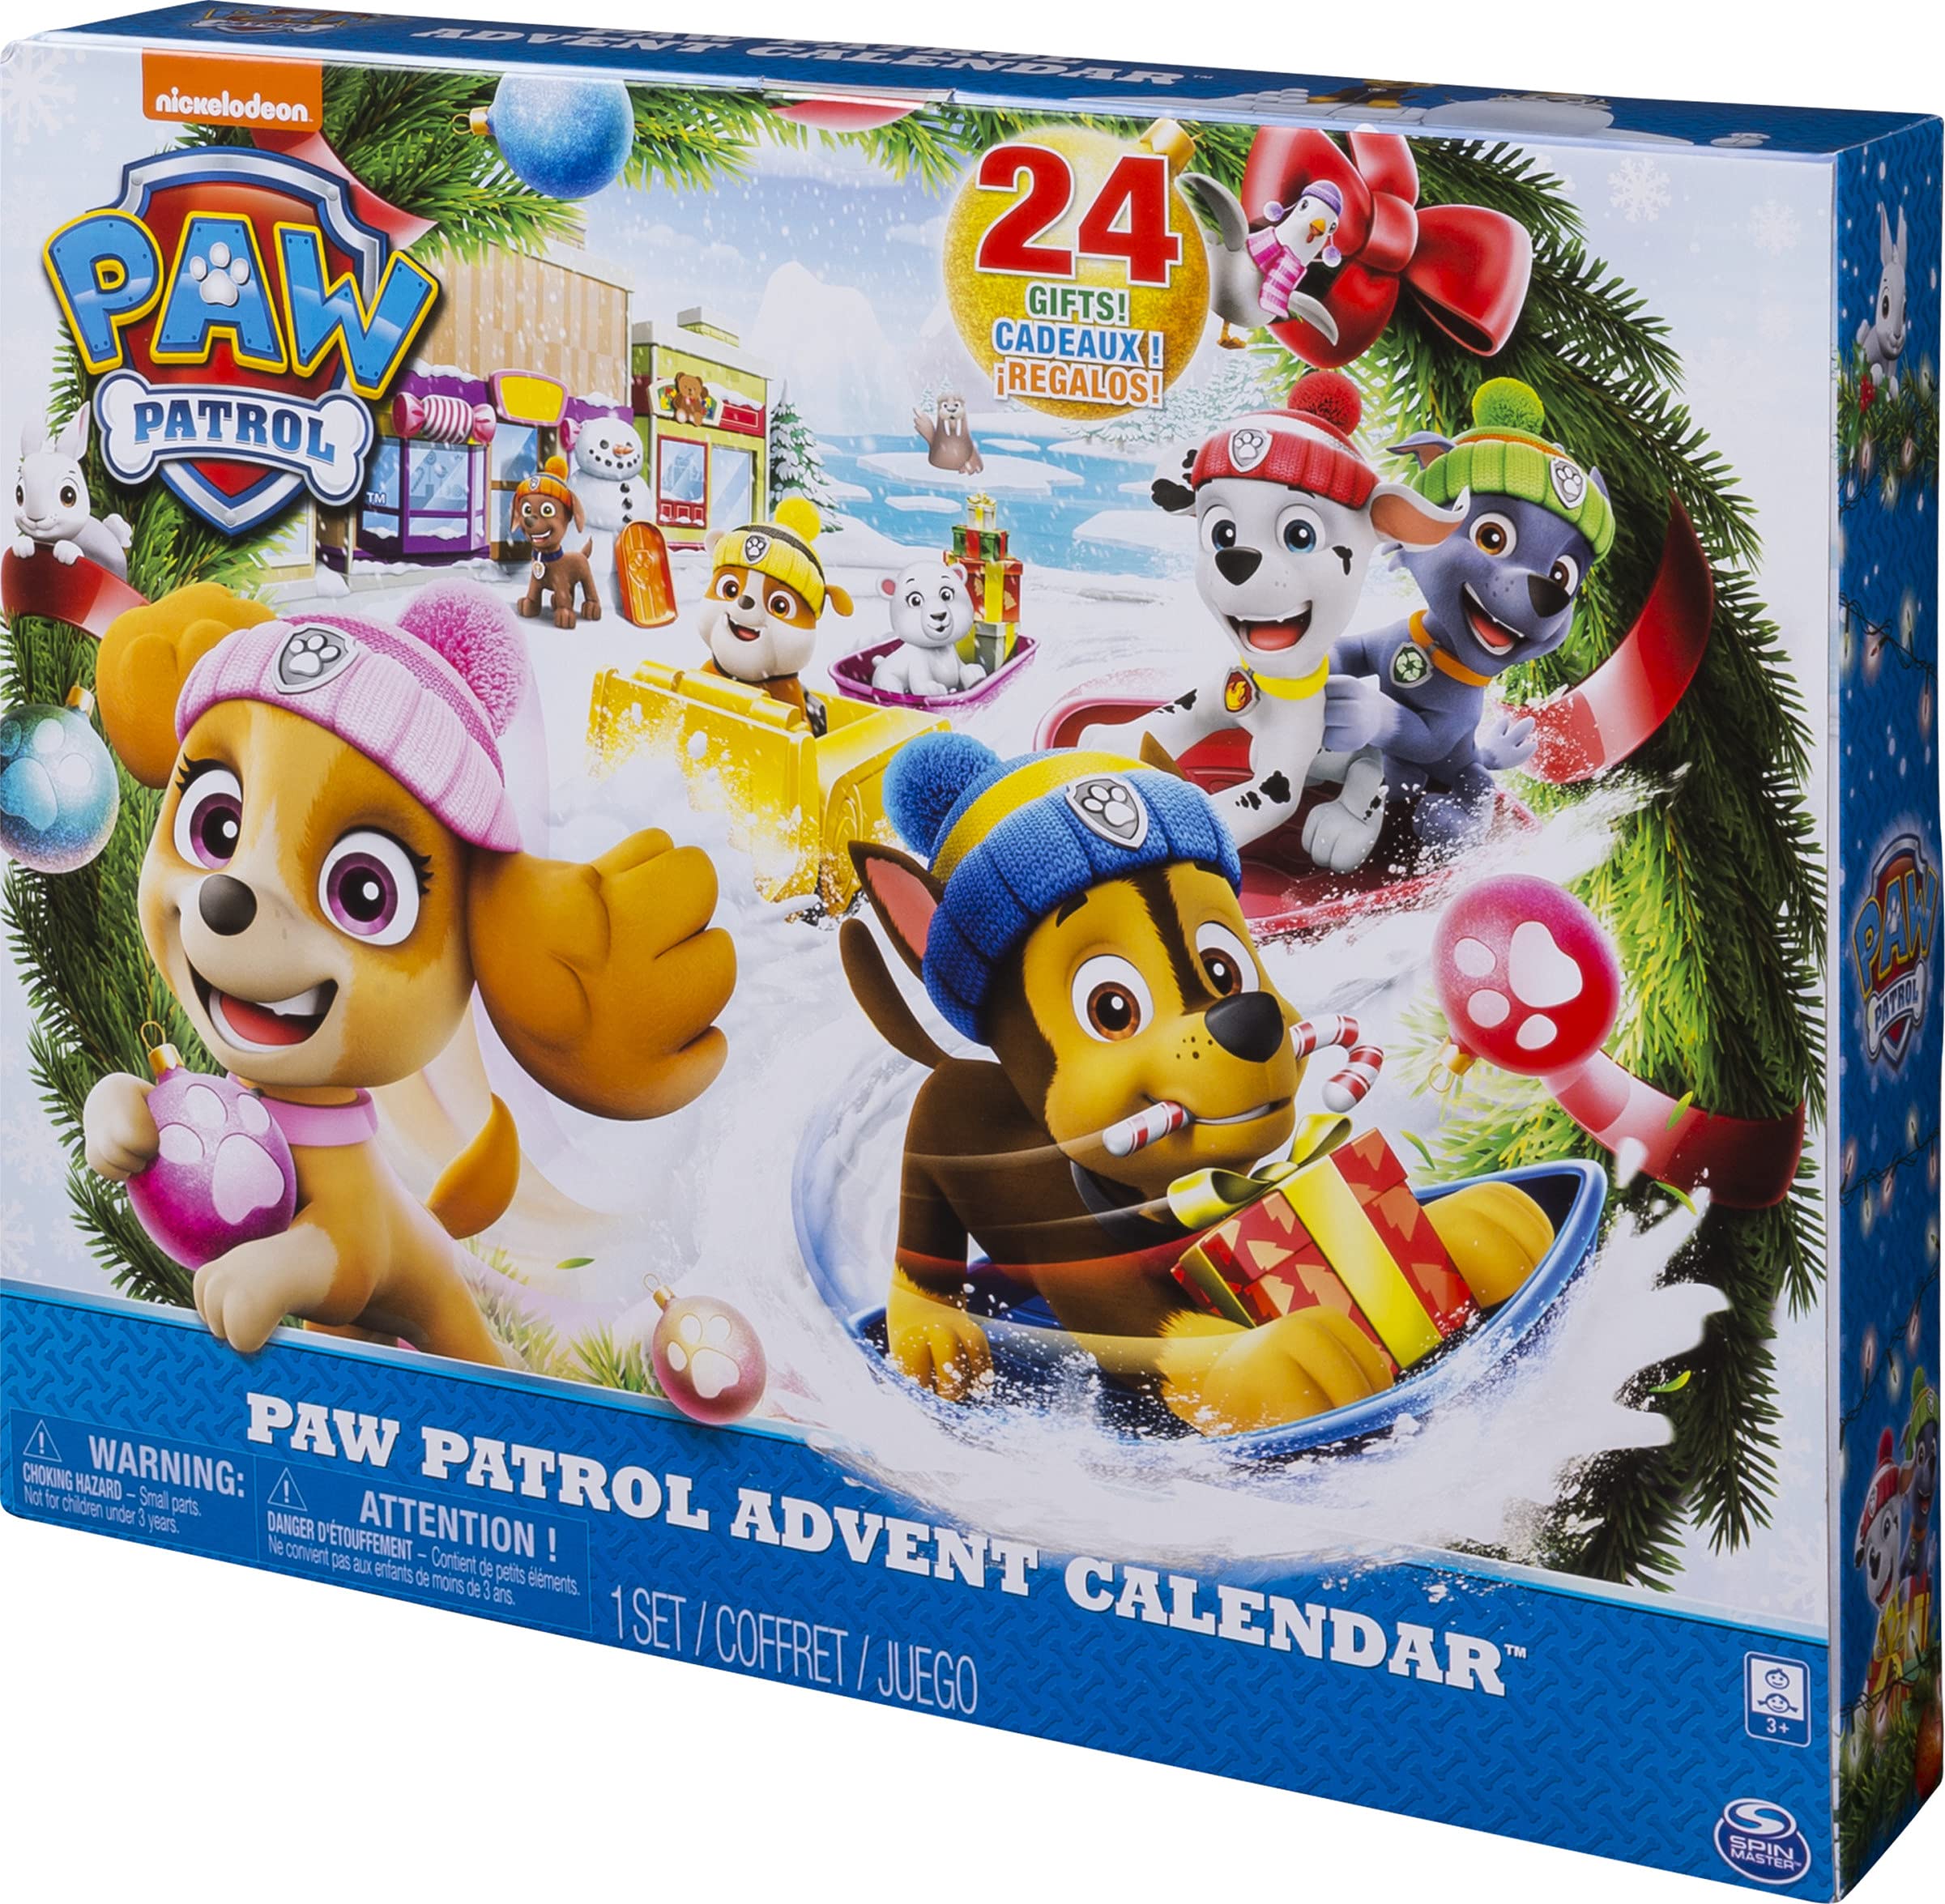 Paw Patrol Advent Calendar with 24 Collectible Plastic Figures